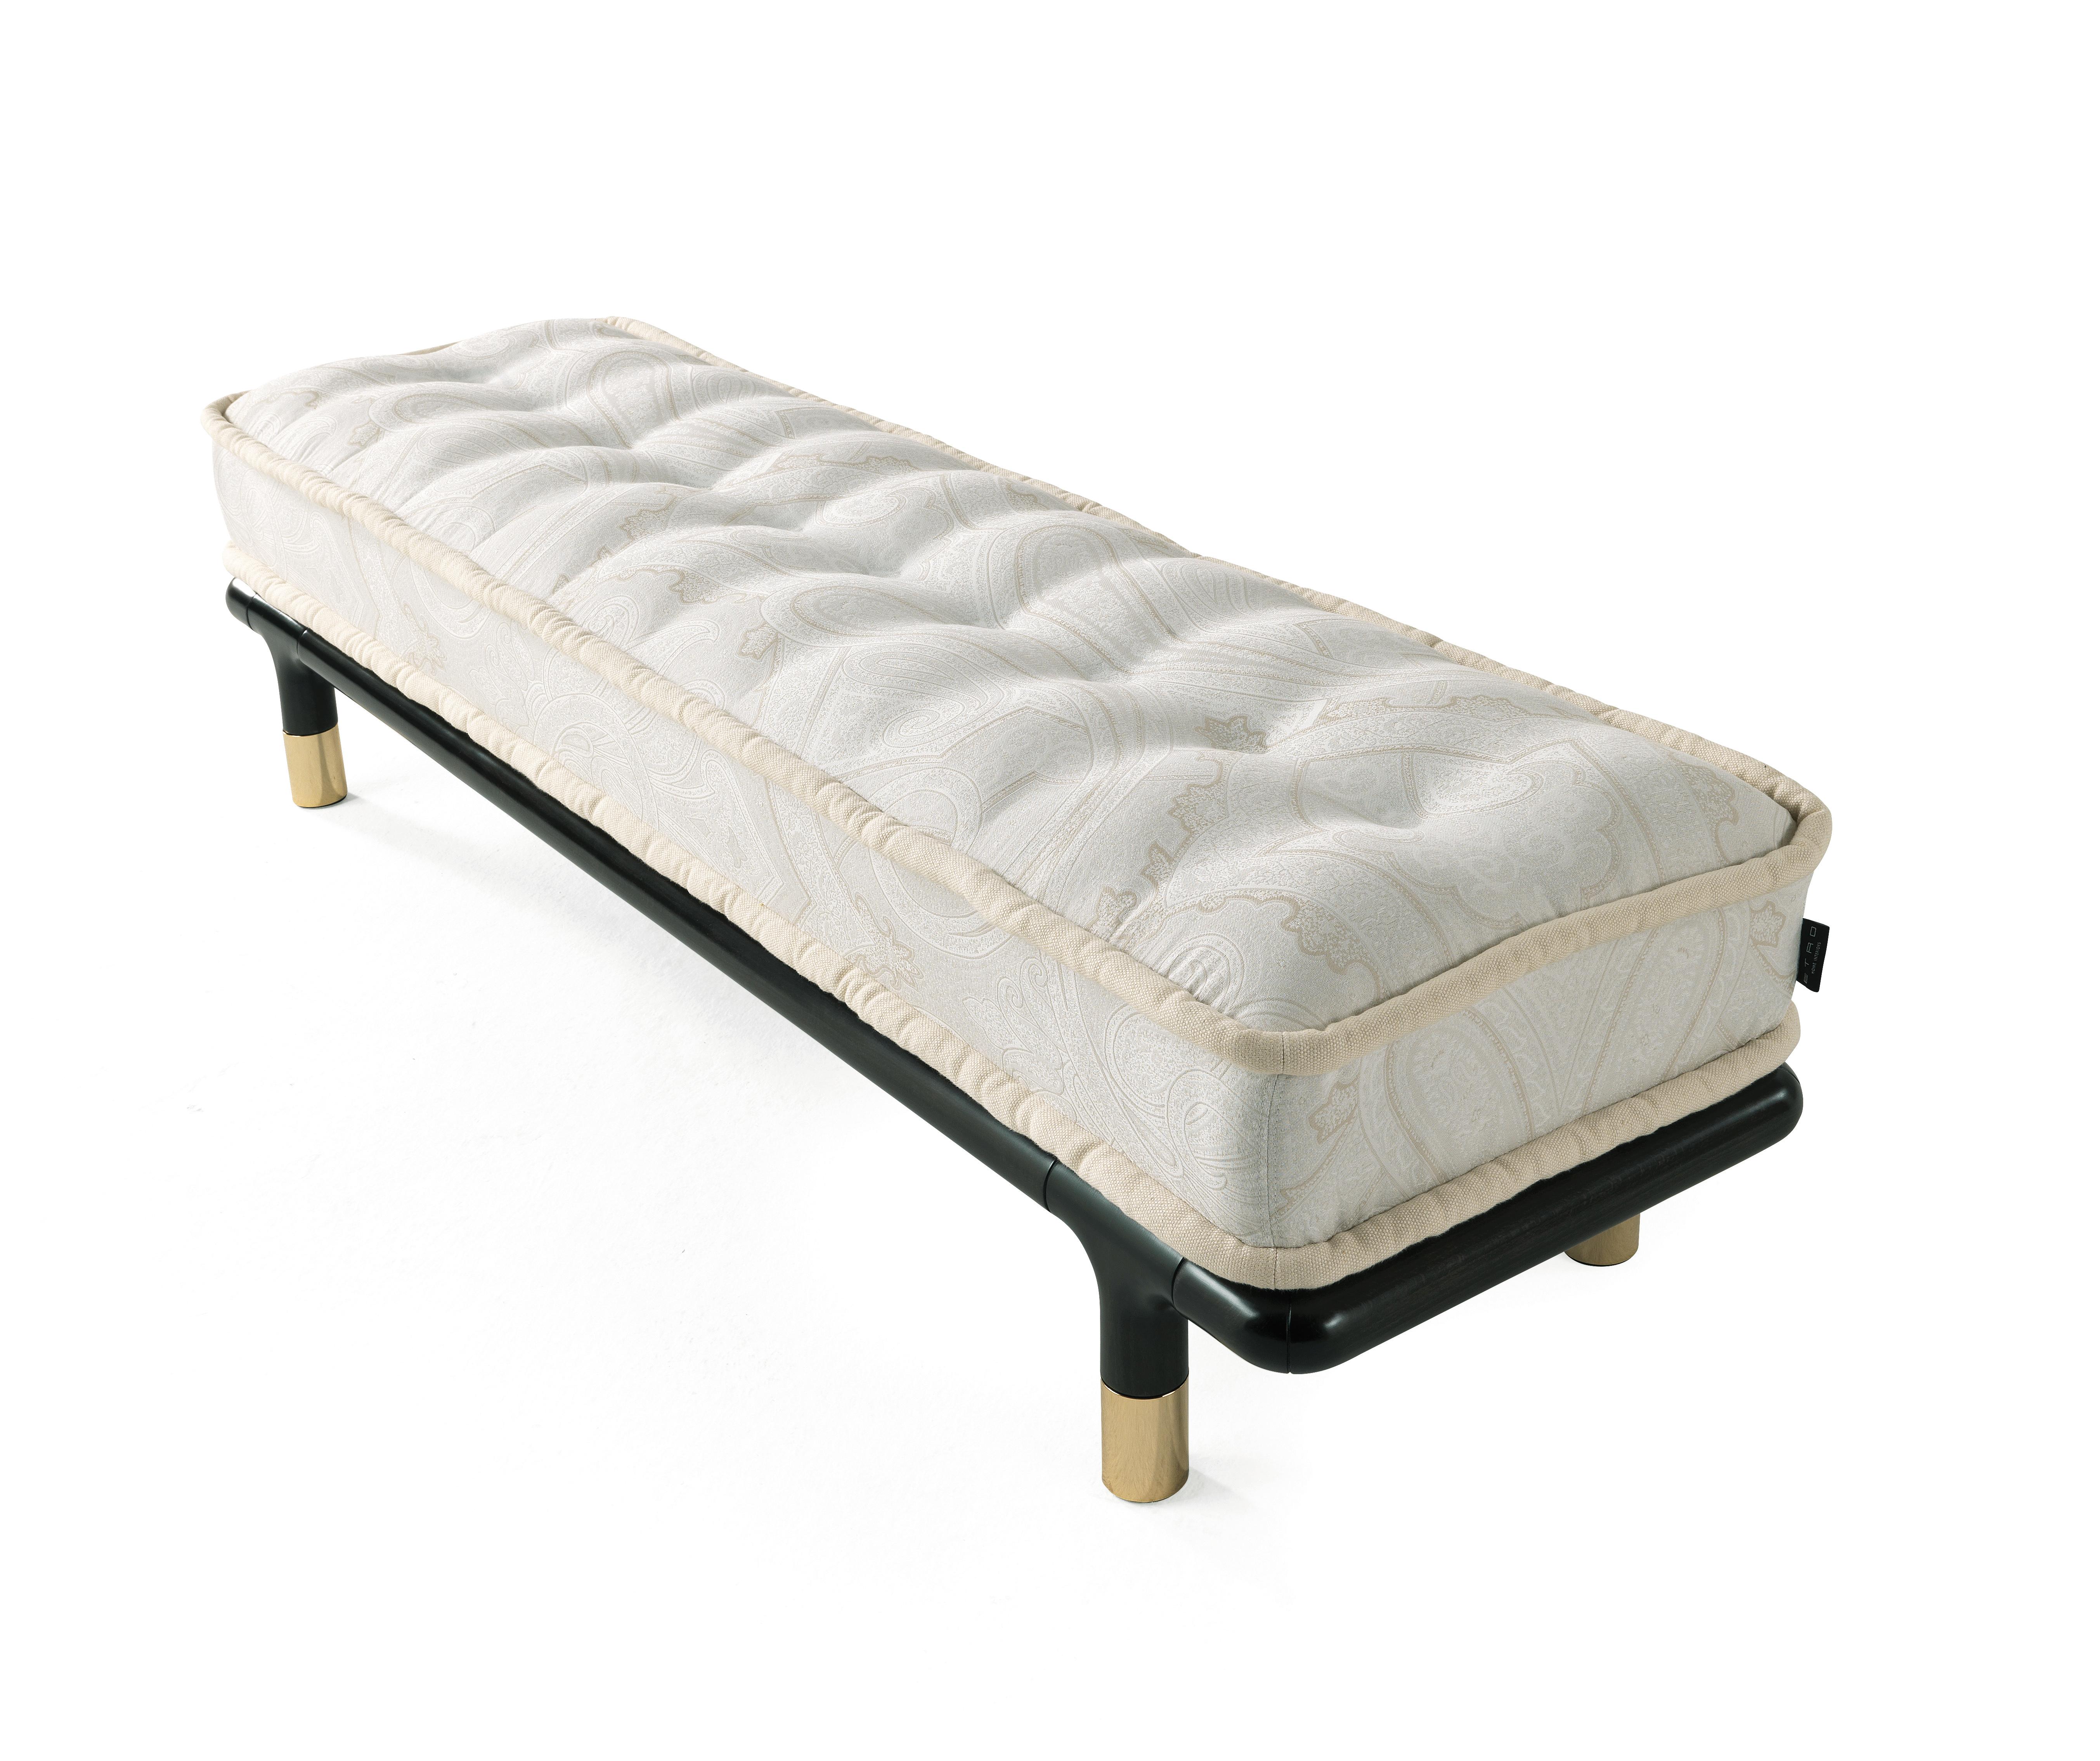 Modern 21st Century Woodstock Bench in Fabric by Etro Home Interiors For Sale